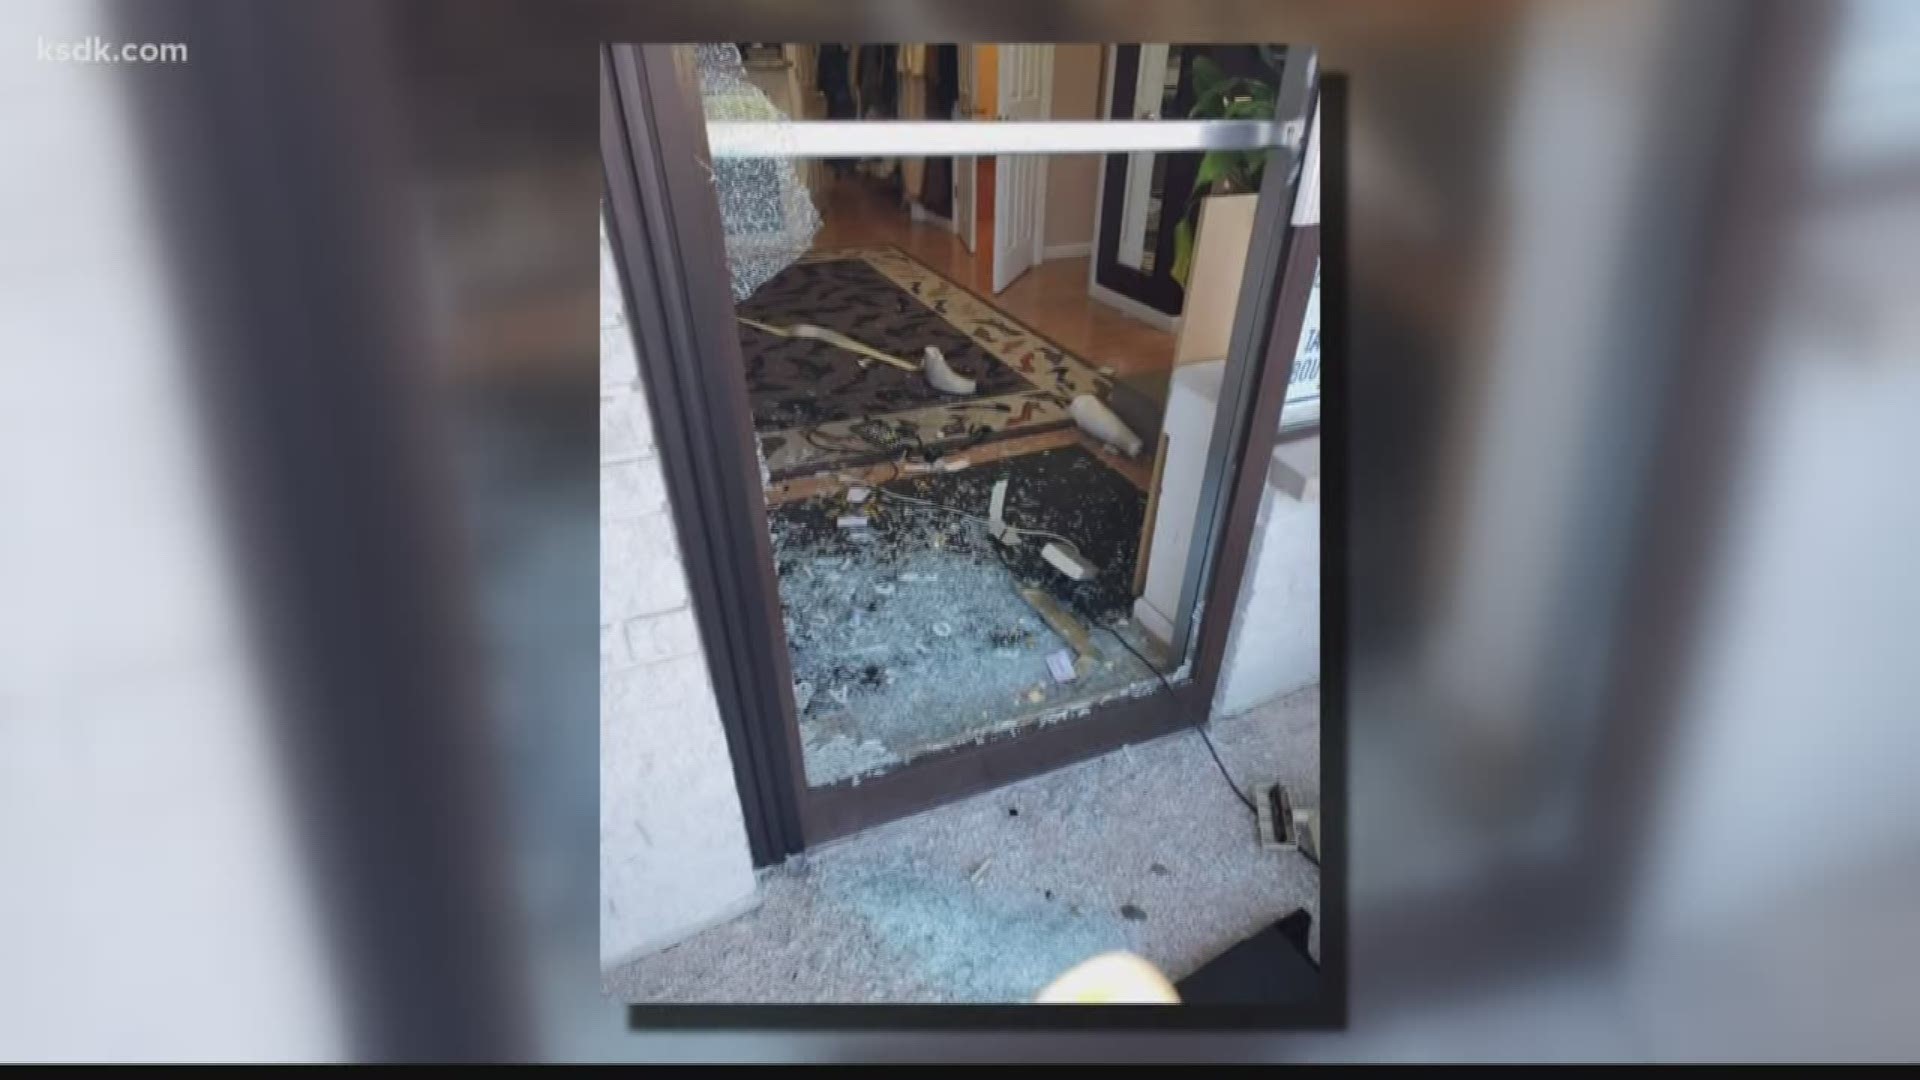 A small business owner said the crooks weren't able to get in the first time they tried, but then the burglars found an unusual method to get inside.